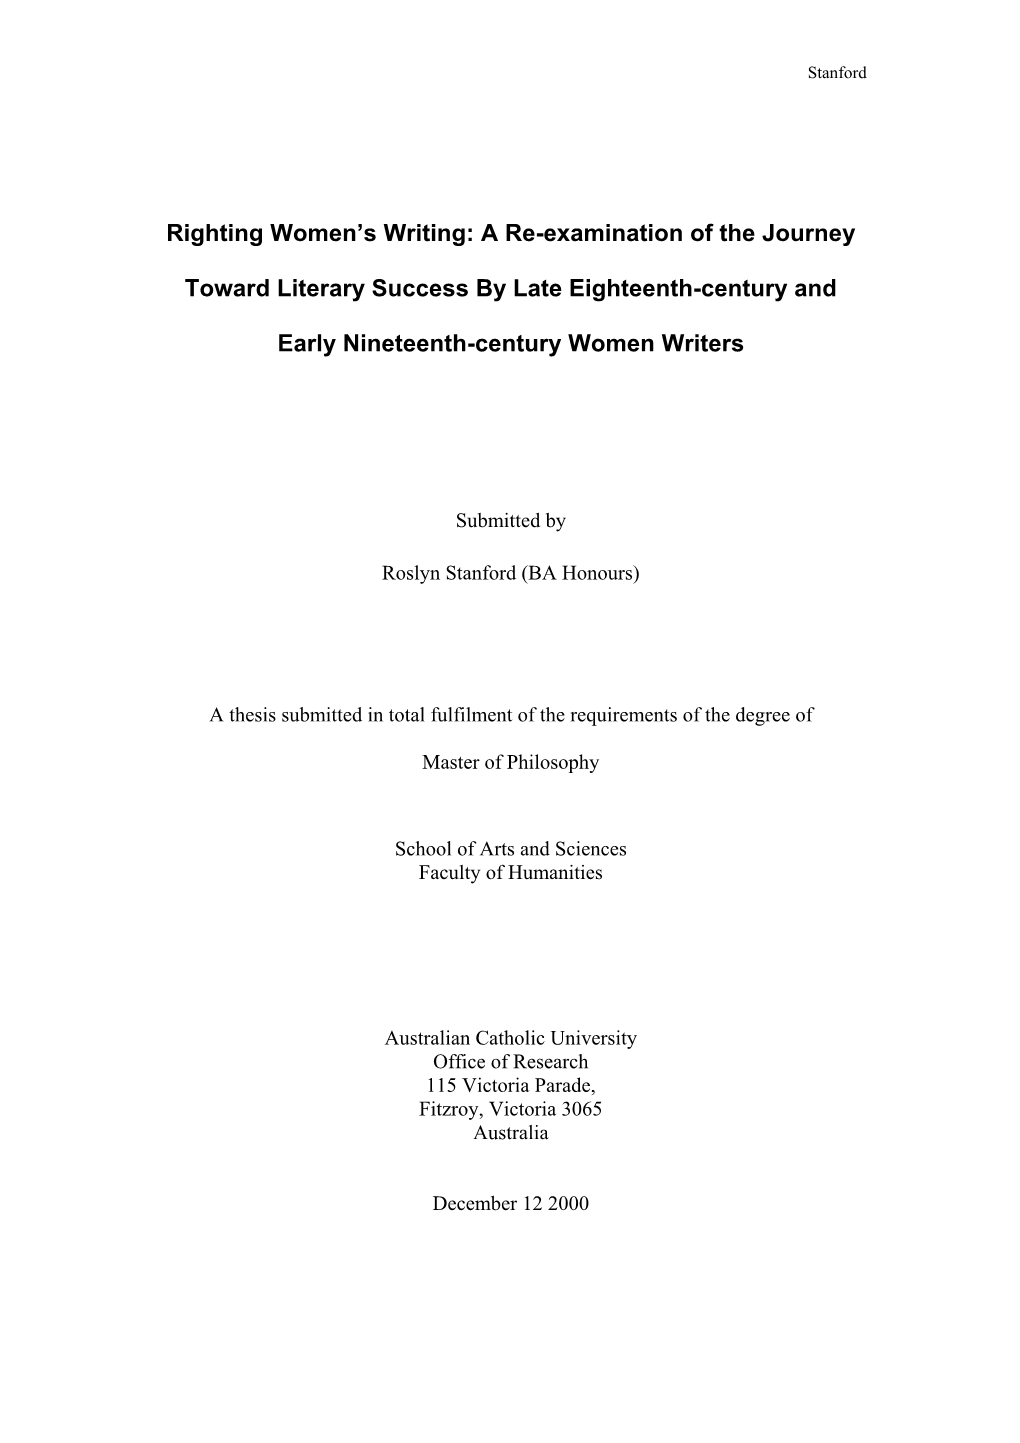 Righting Women's Writing: a Re-Examination of the Journey Toward Literary Success by Late Eighteenth-Century and Early Ninetee